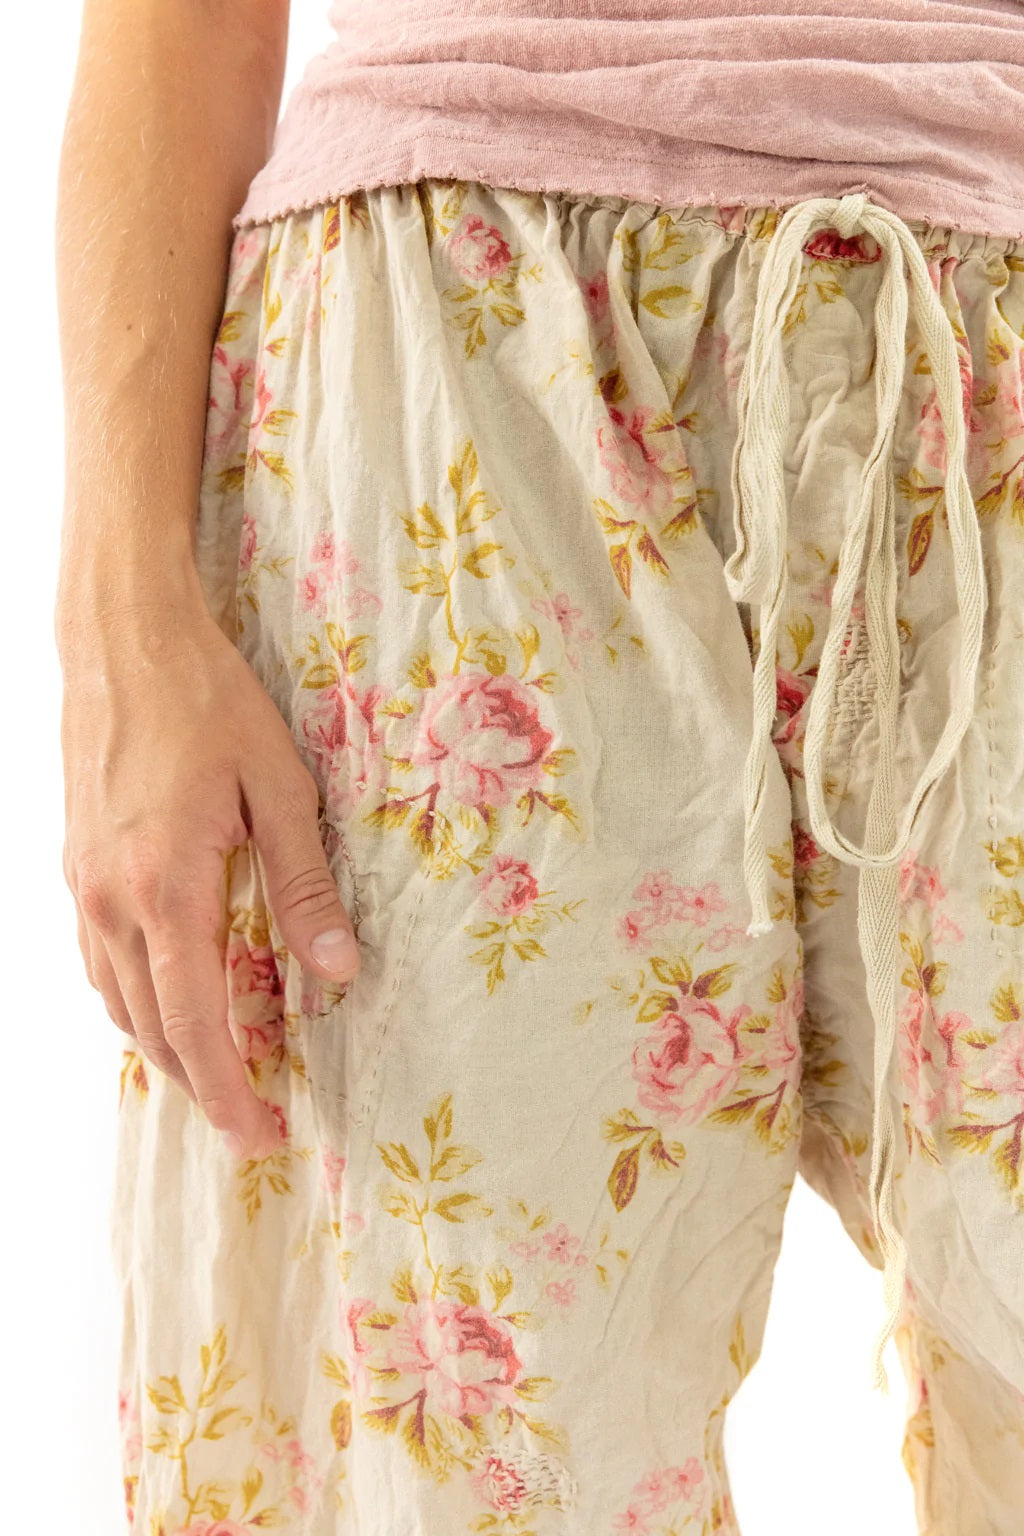 FLORAL KHLOE BLOOMERS - CORALIE - Kingfisher Road - Online Boutique